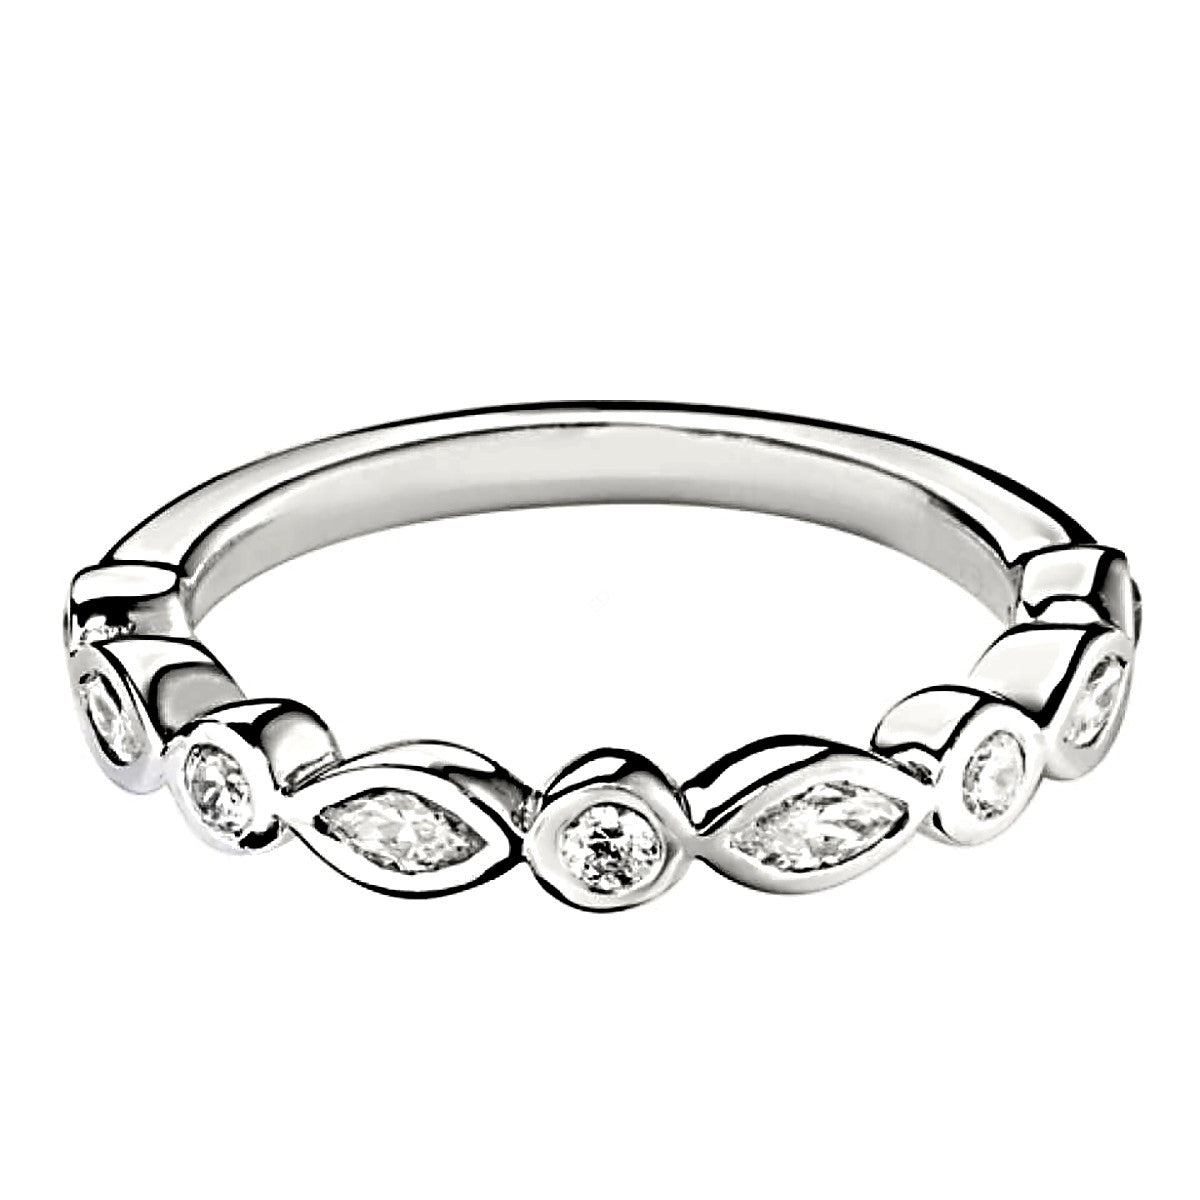 Mixed Bezels Round and Marquise cut Diamond Band Ring - Prime & Pure